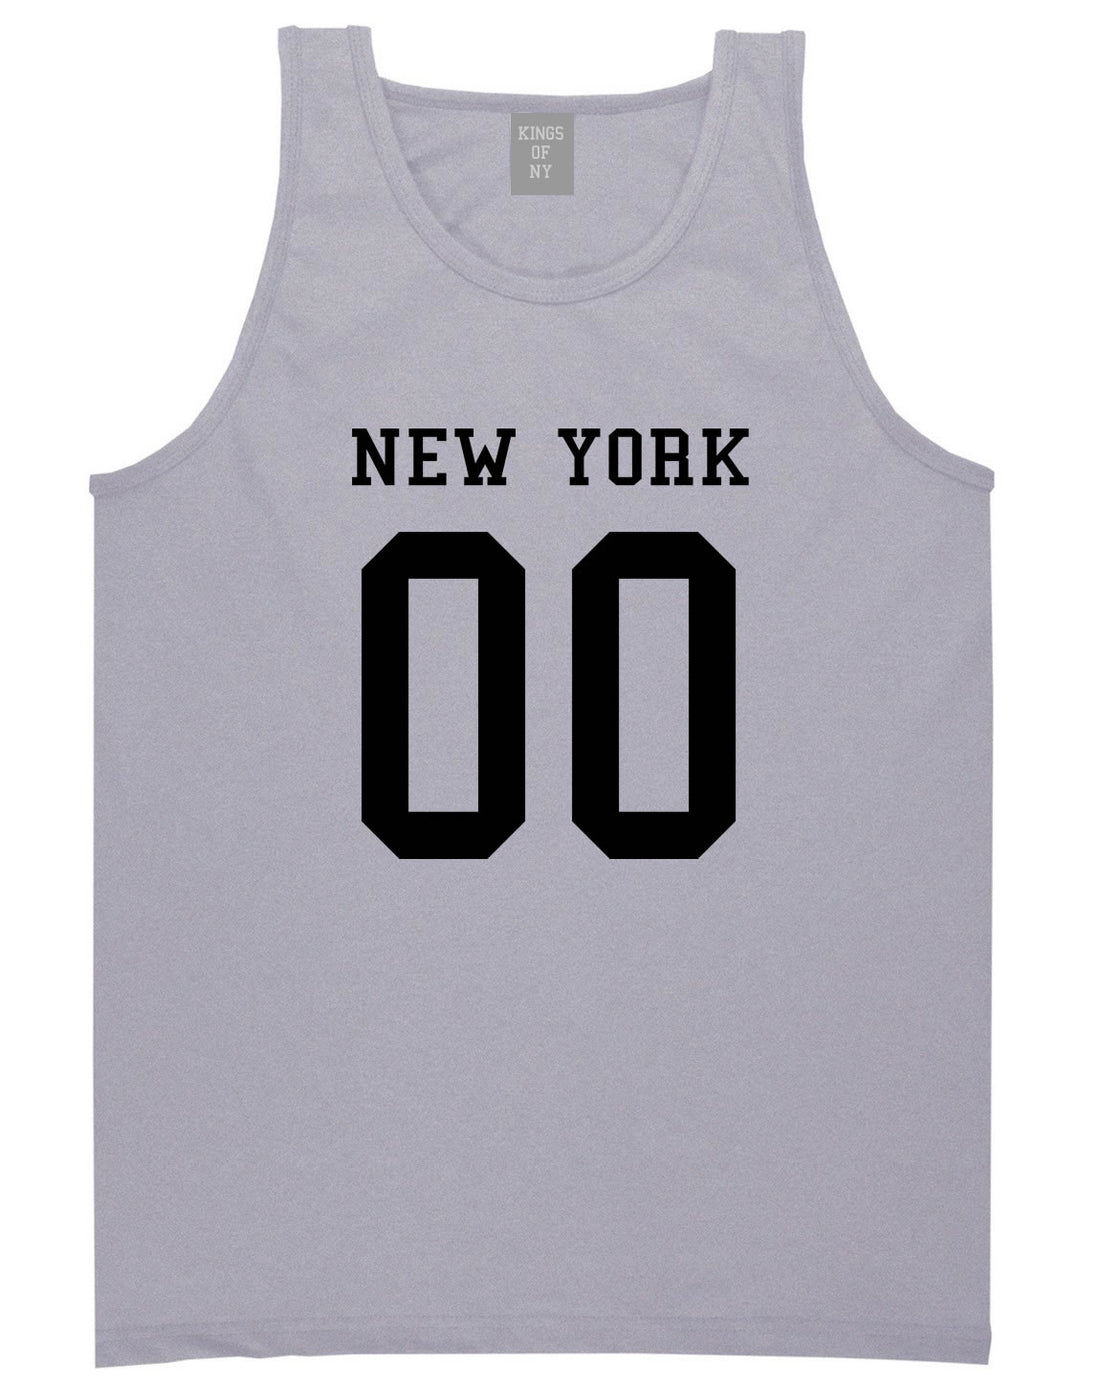 New York Team 00 Jersey Tank Top in Grey By Kings Of NY